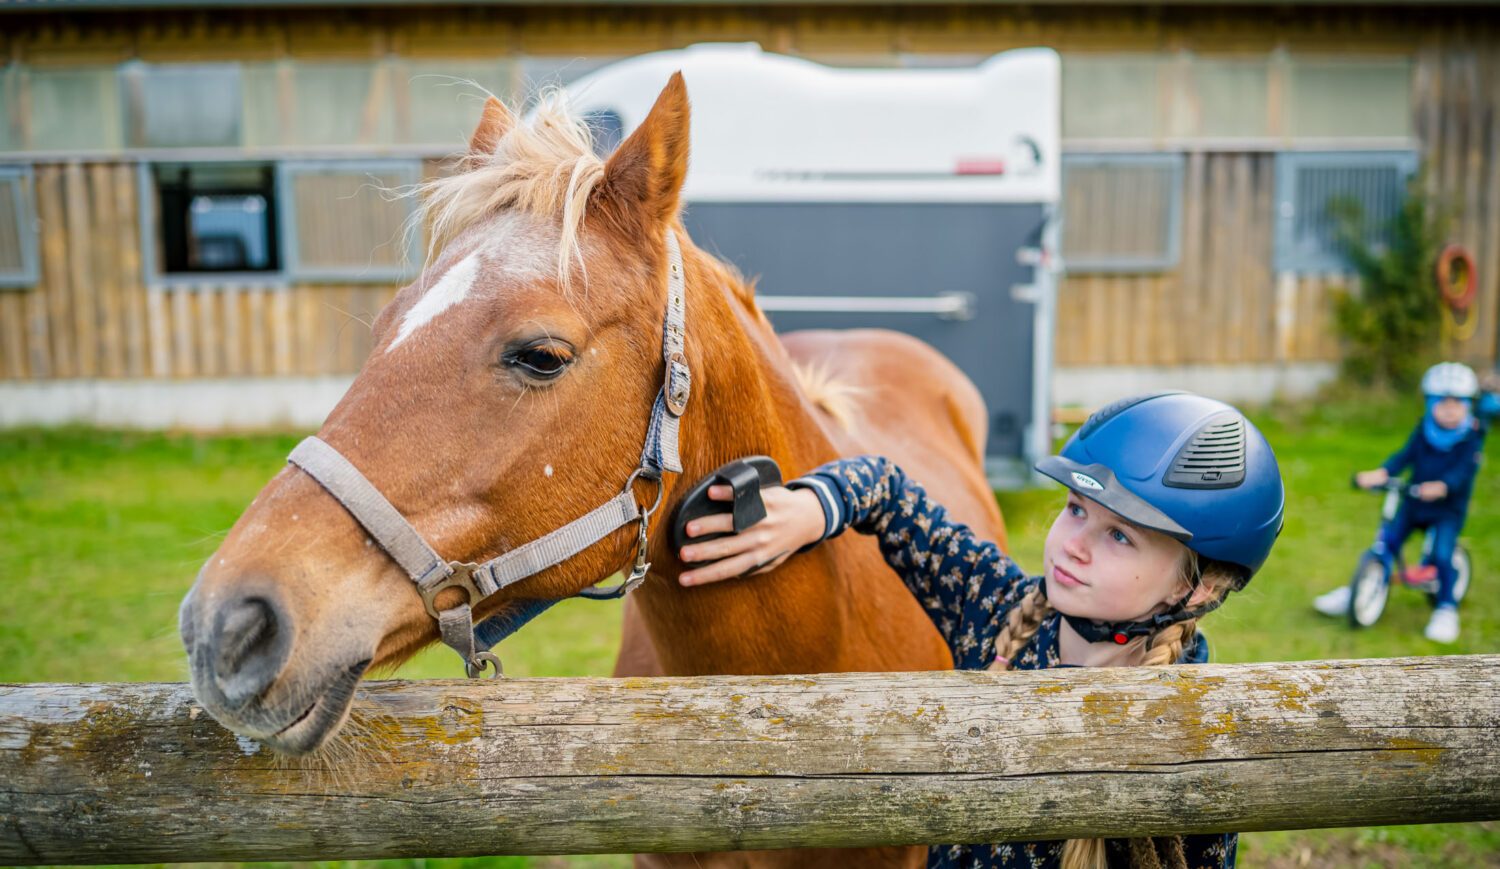 At the equestrian farm, children also learn how to properly care for the horses during their vacations © TMV/Tiemann